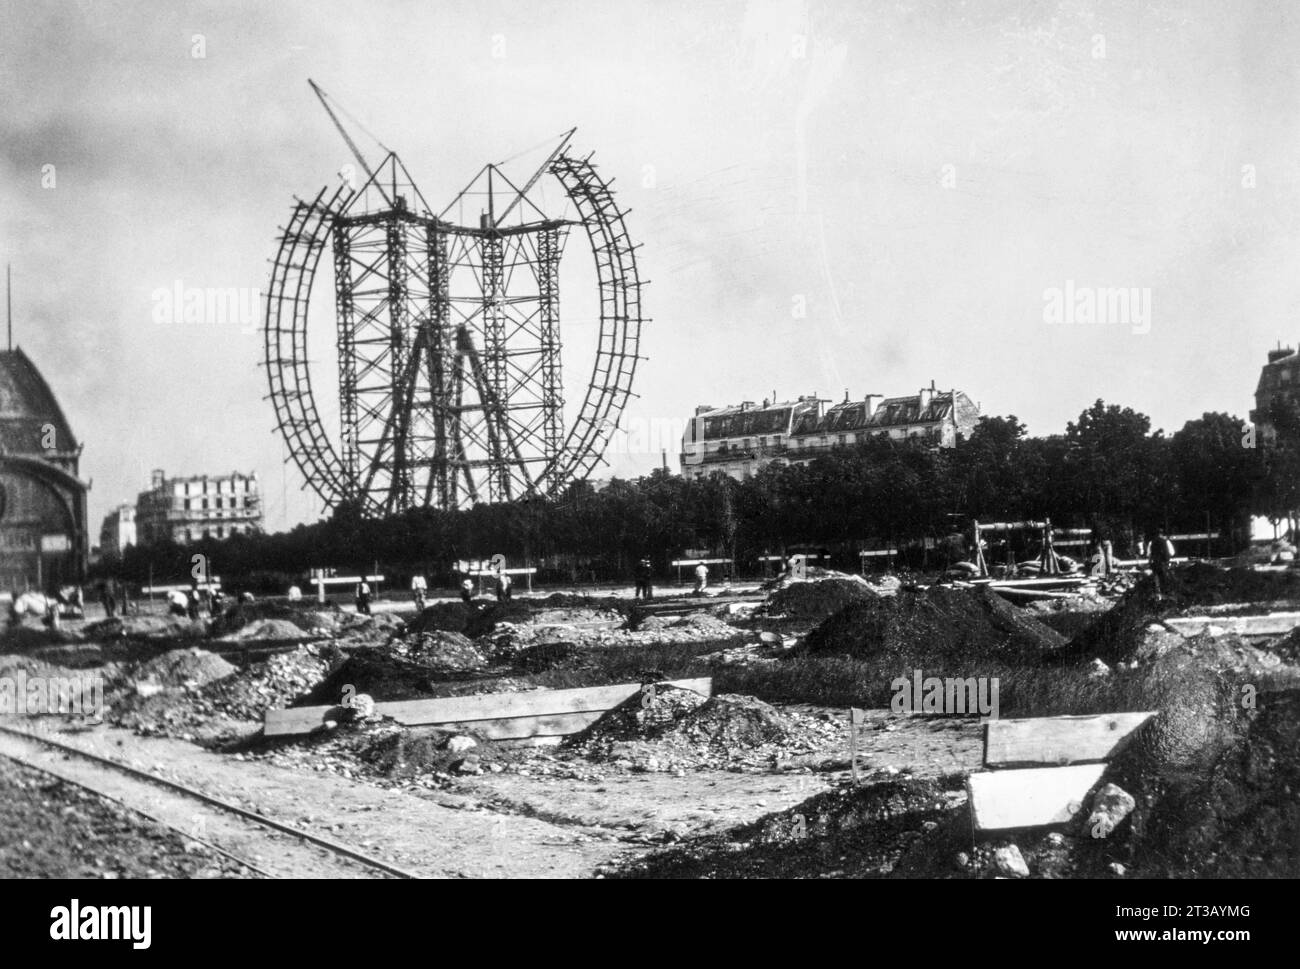 Photography , Construction of the Paris Ferris wheel in 1888 for the 1900 Universal Exhibition. Stock Photo